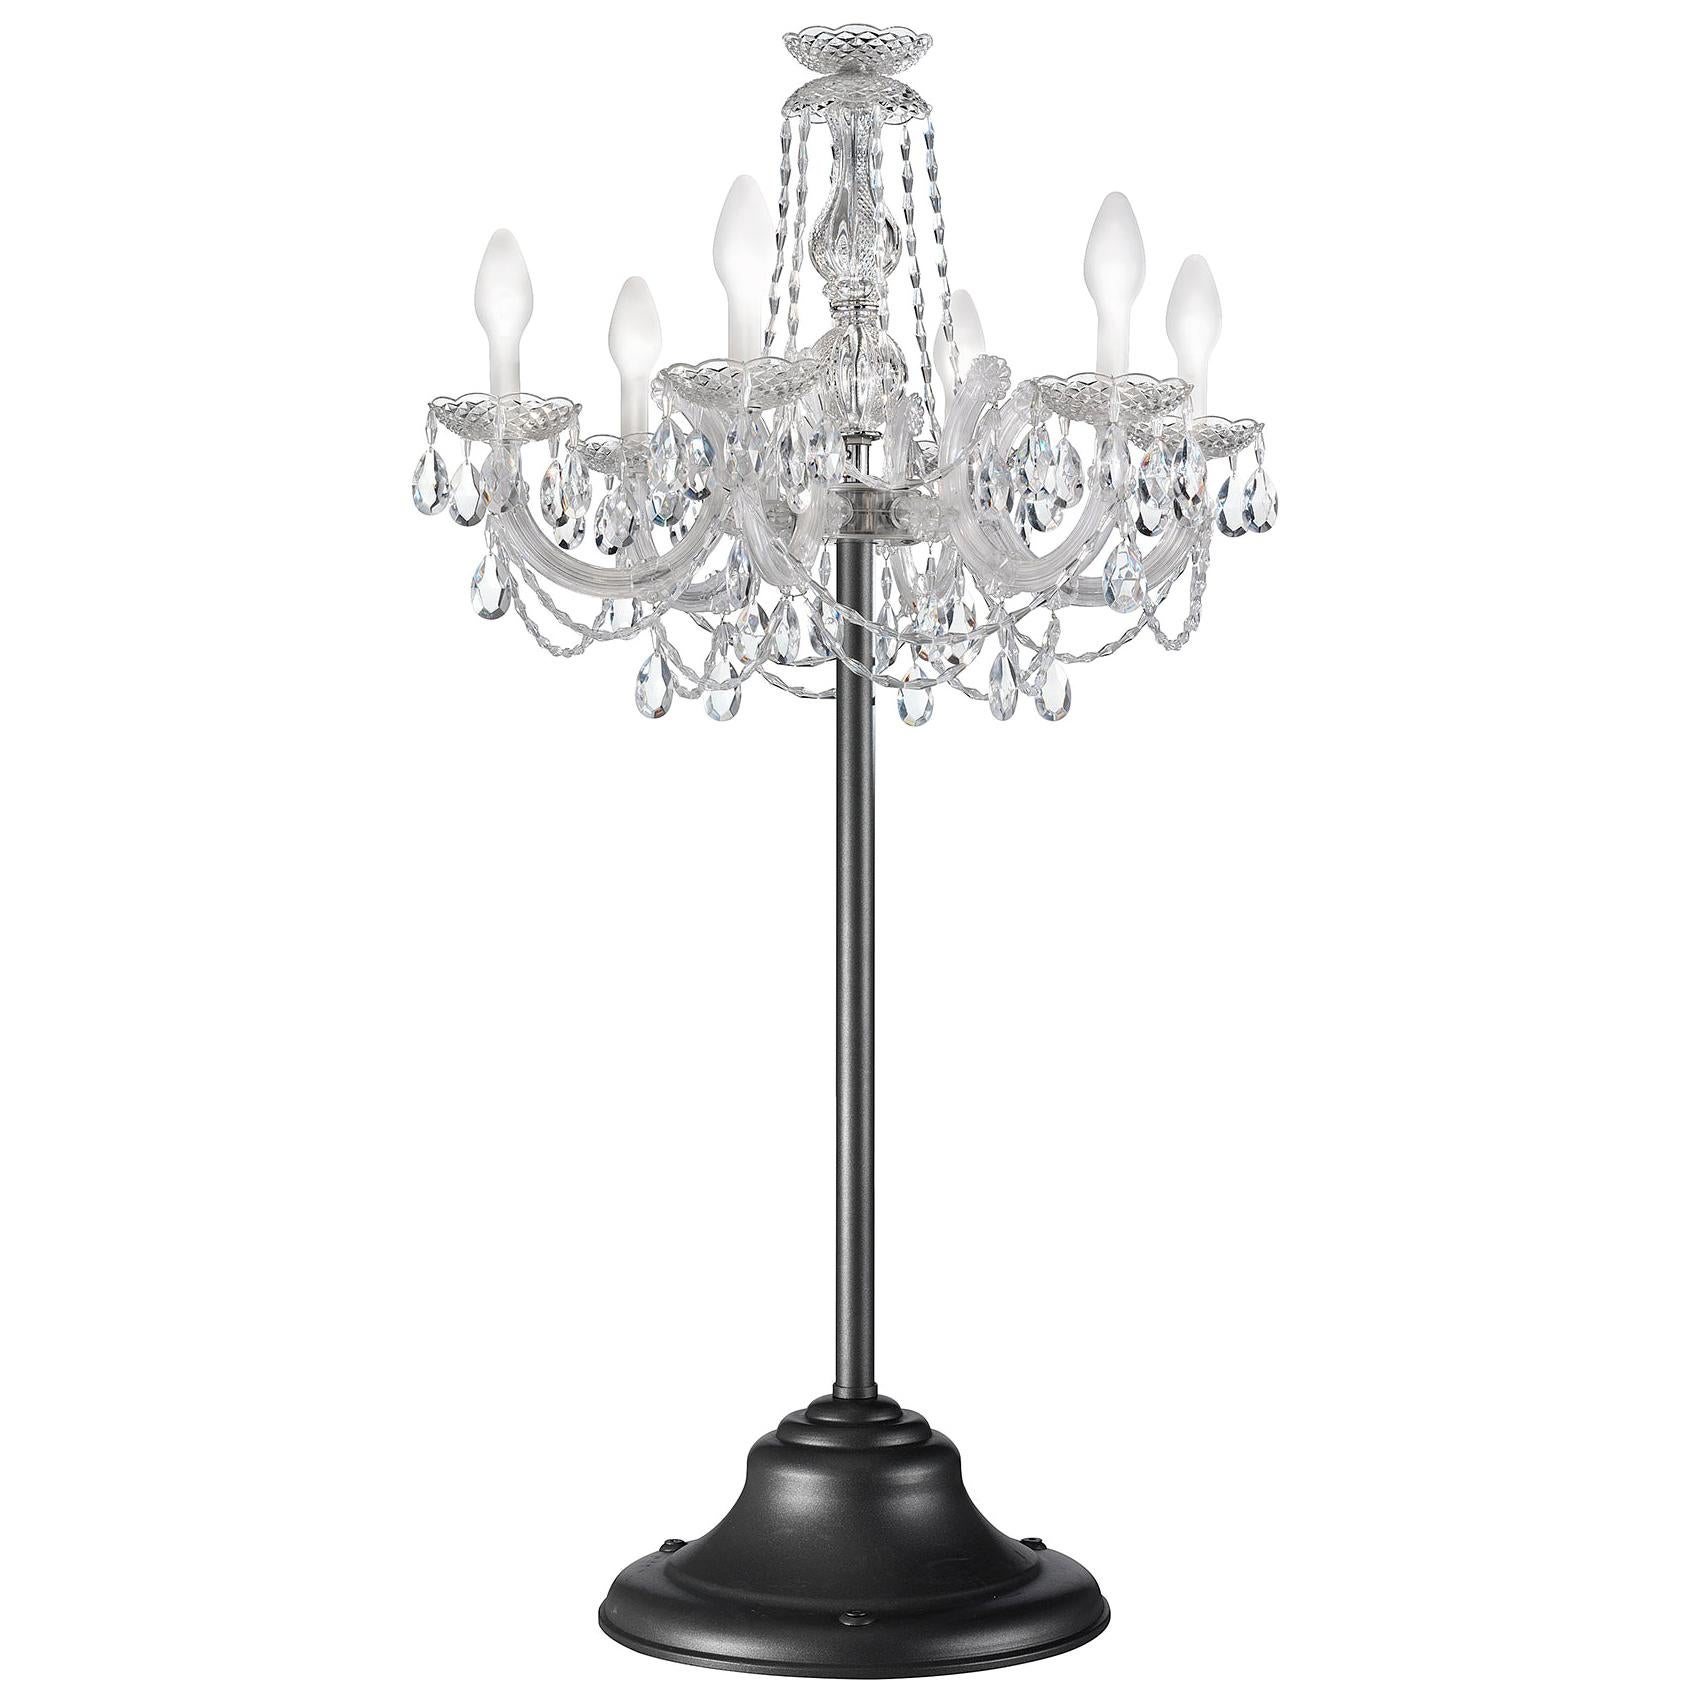 In Stock in Los Angeles, Outdoor Venetian Table Lamp 6 Lights, Made in Italy